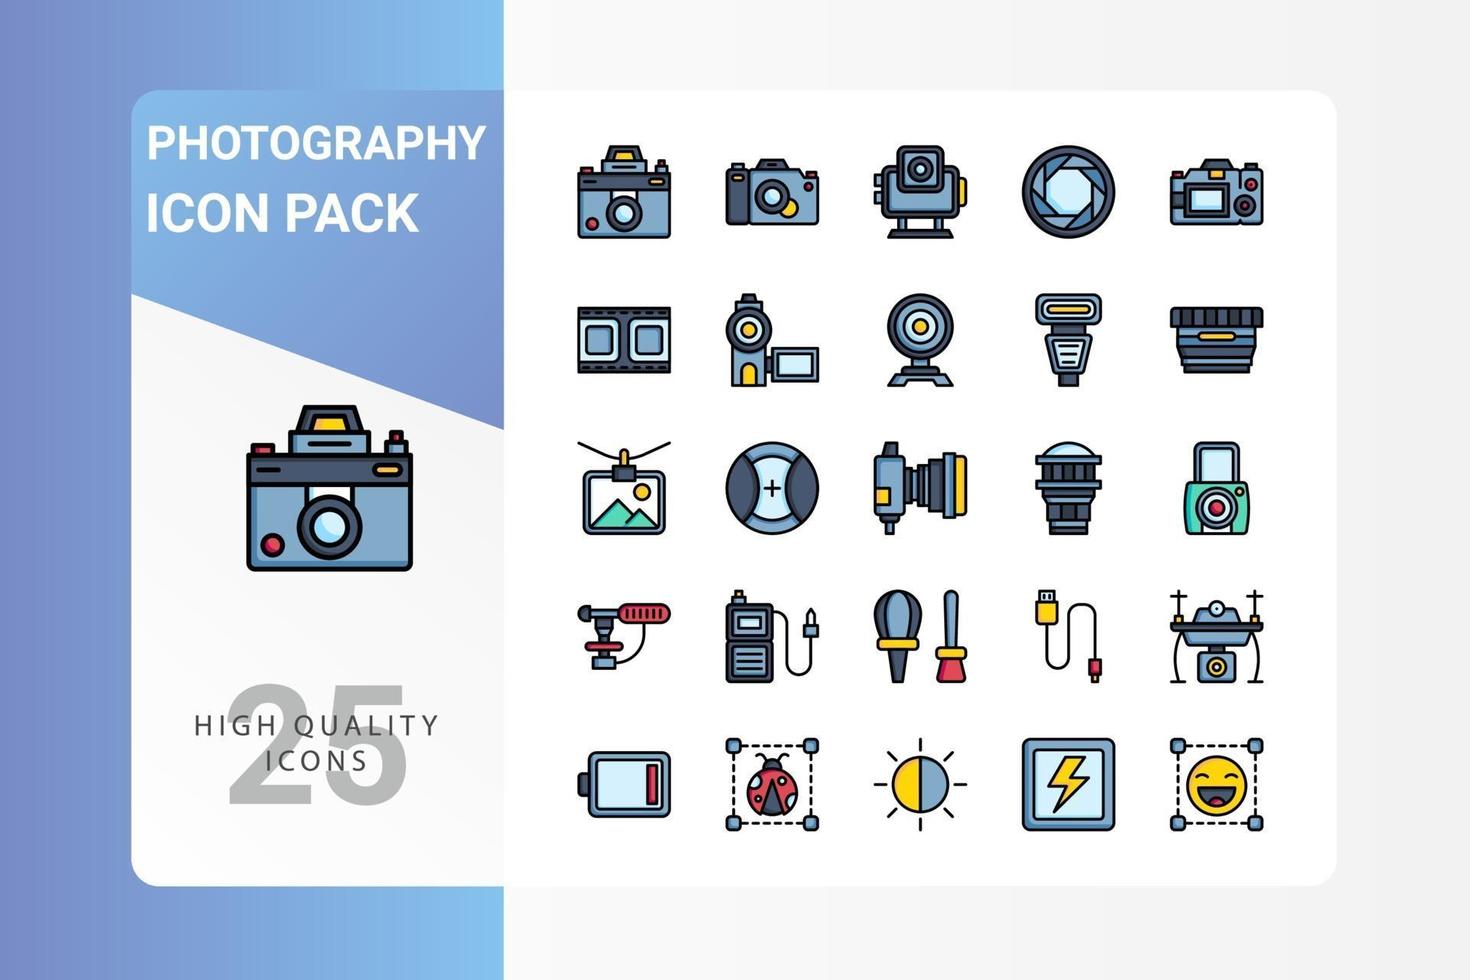 Photography icon pack for your web site design, logo, app, UI vector